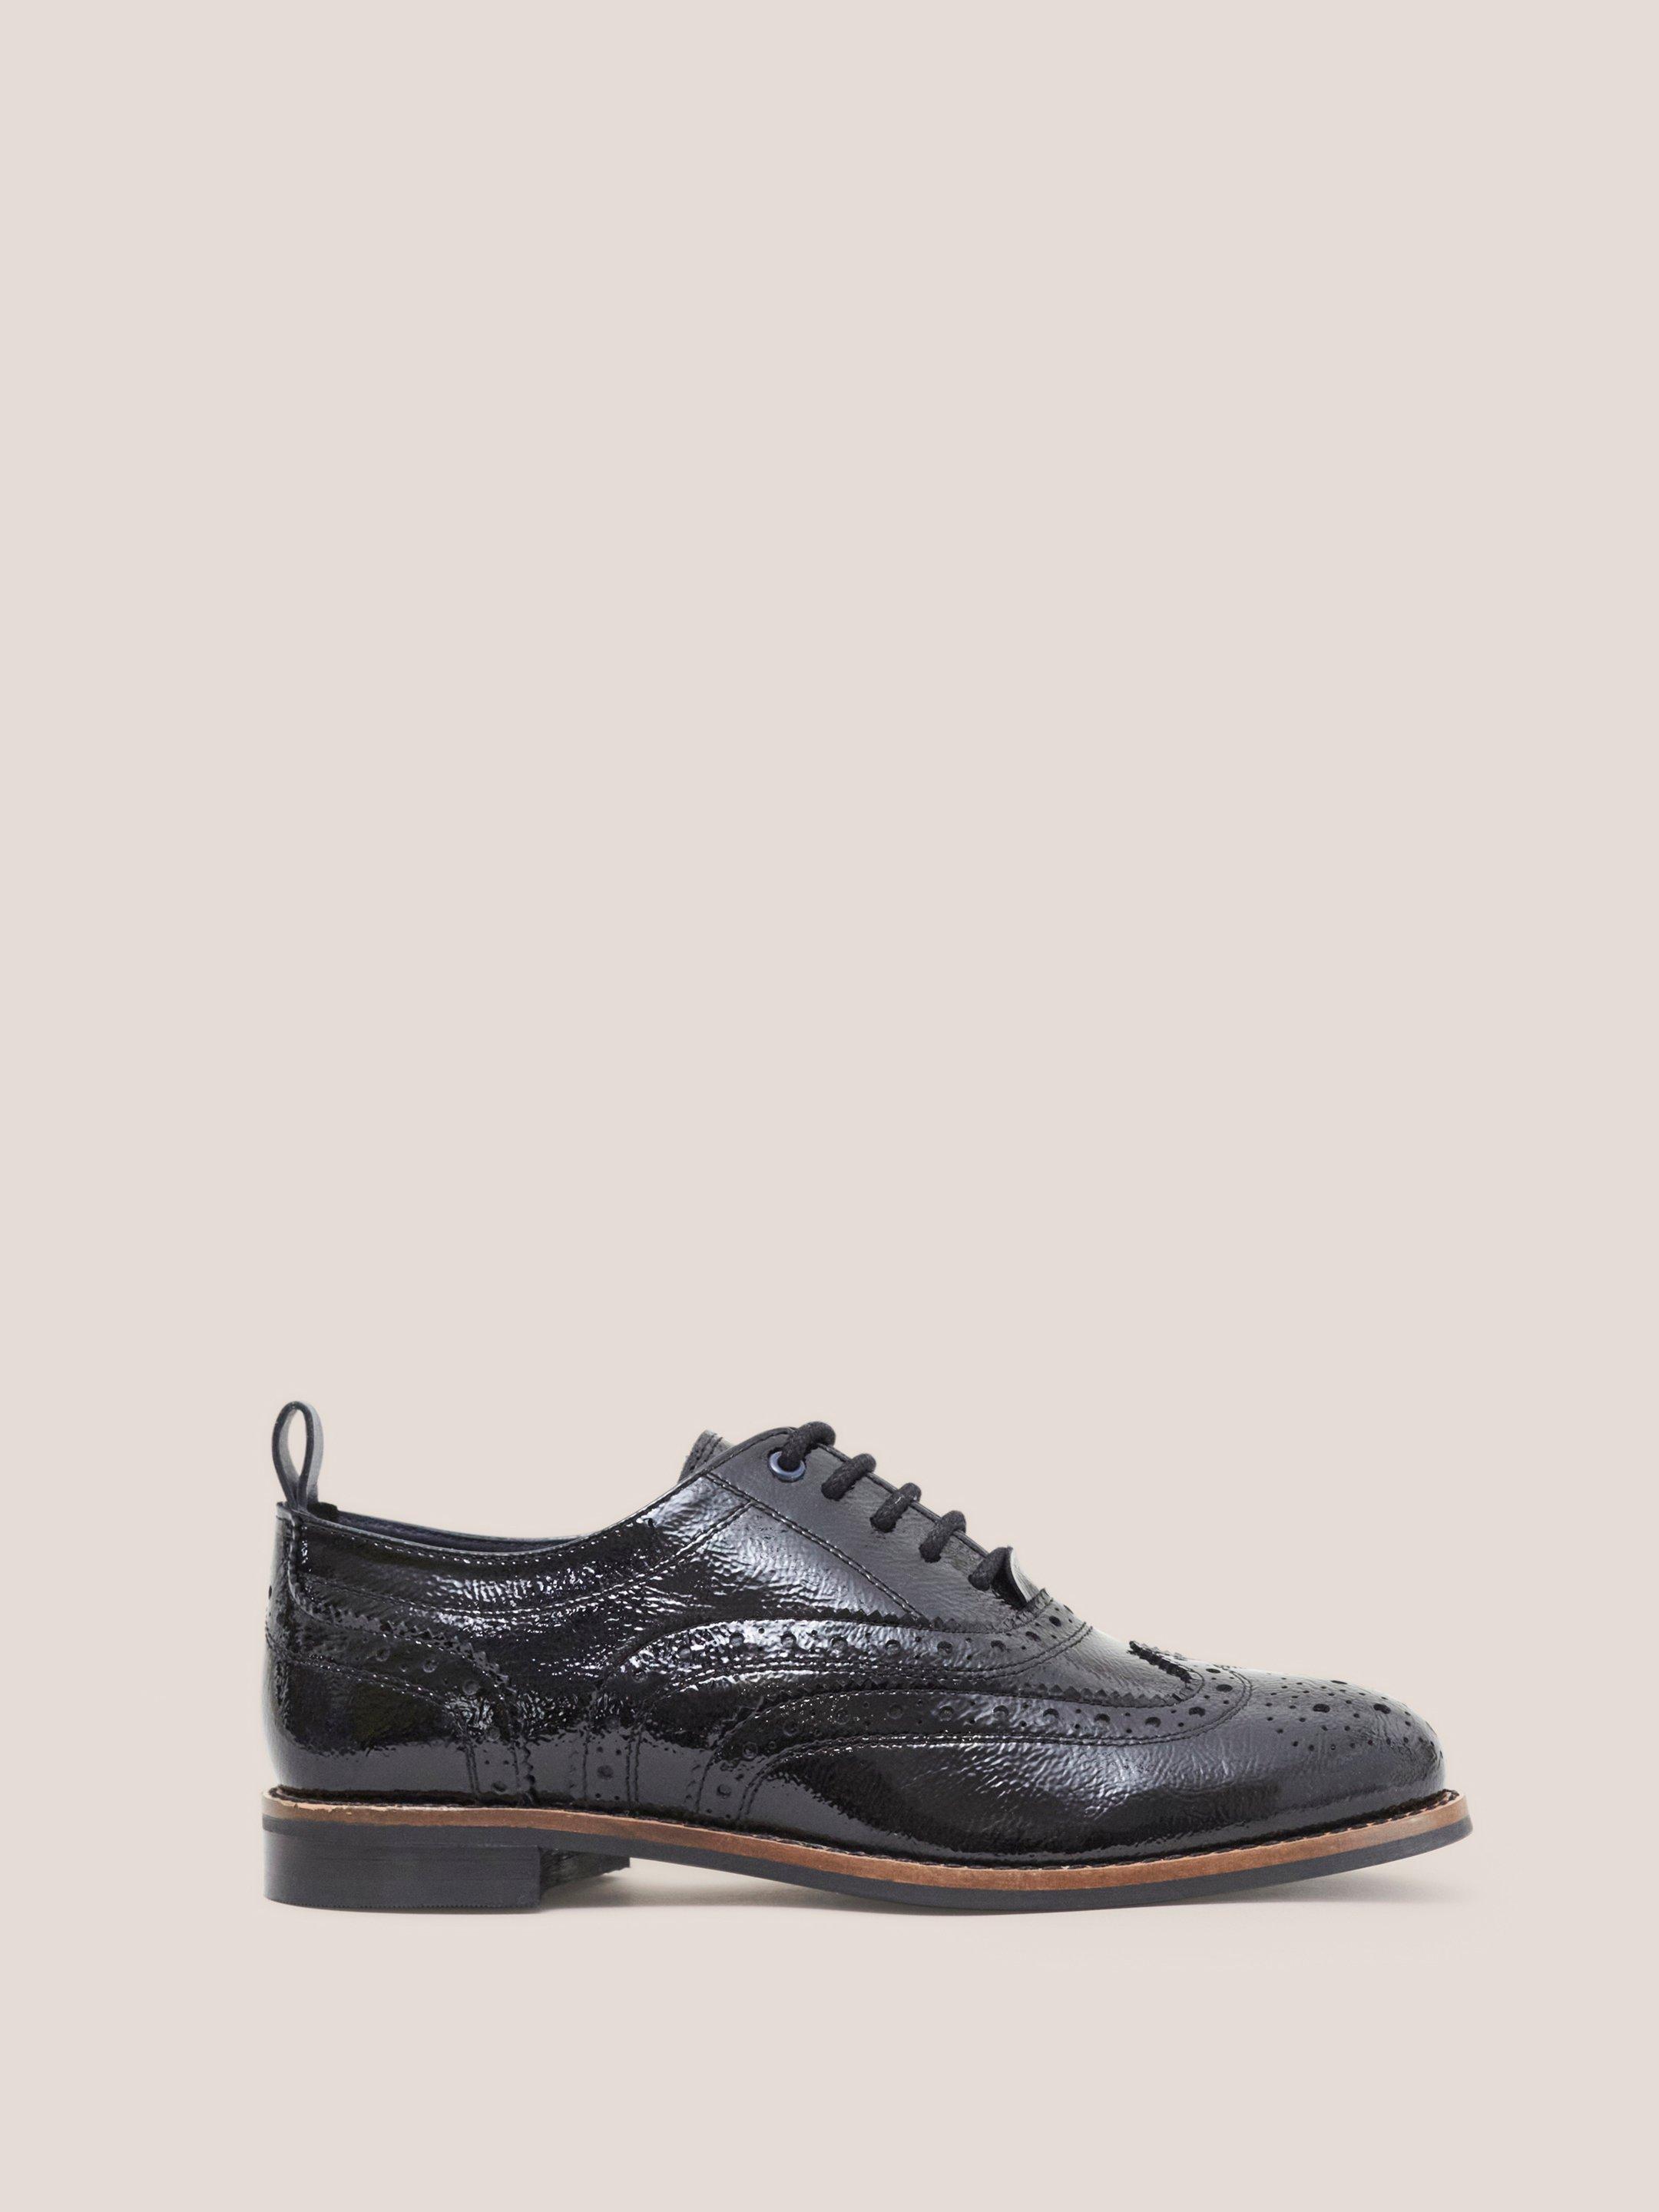 Thistle Patent Lace Up Brogue